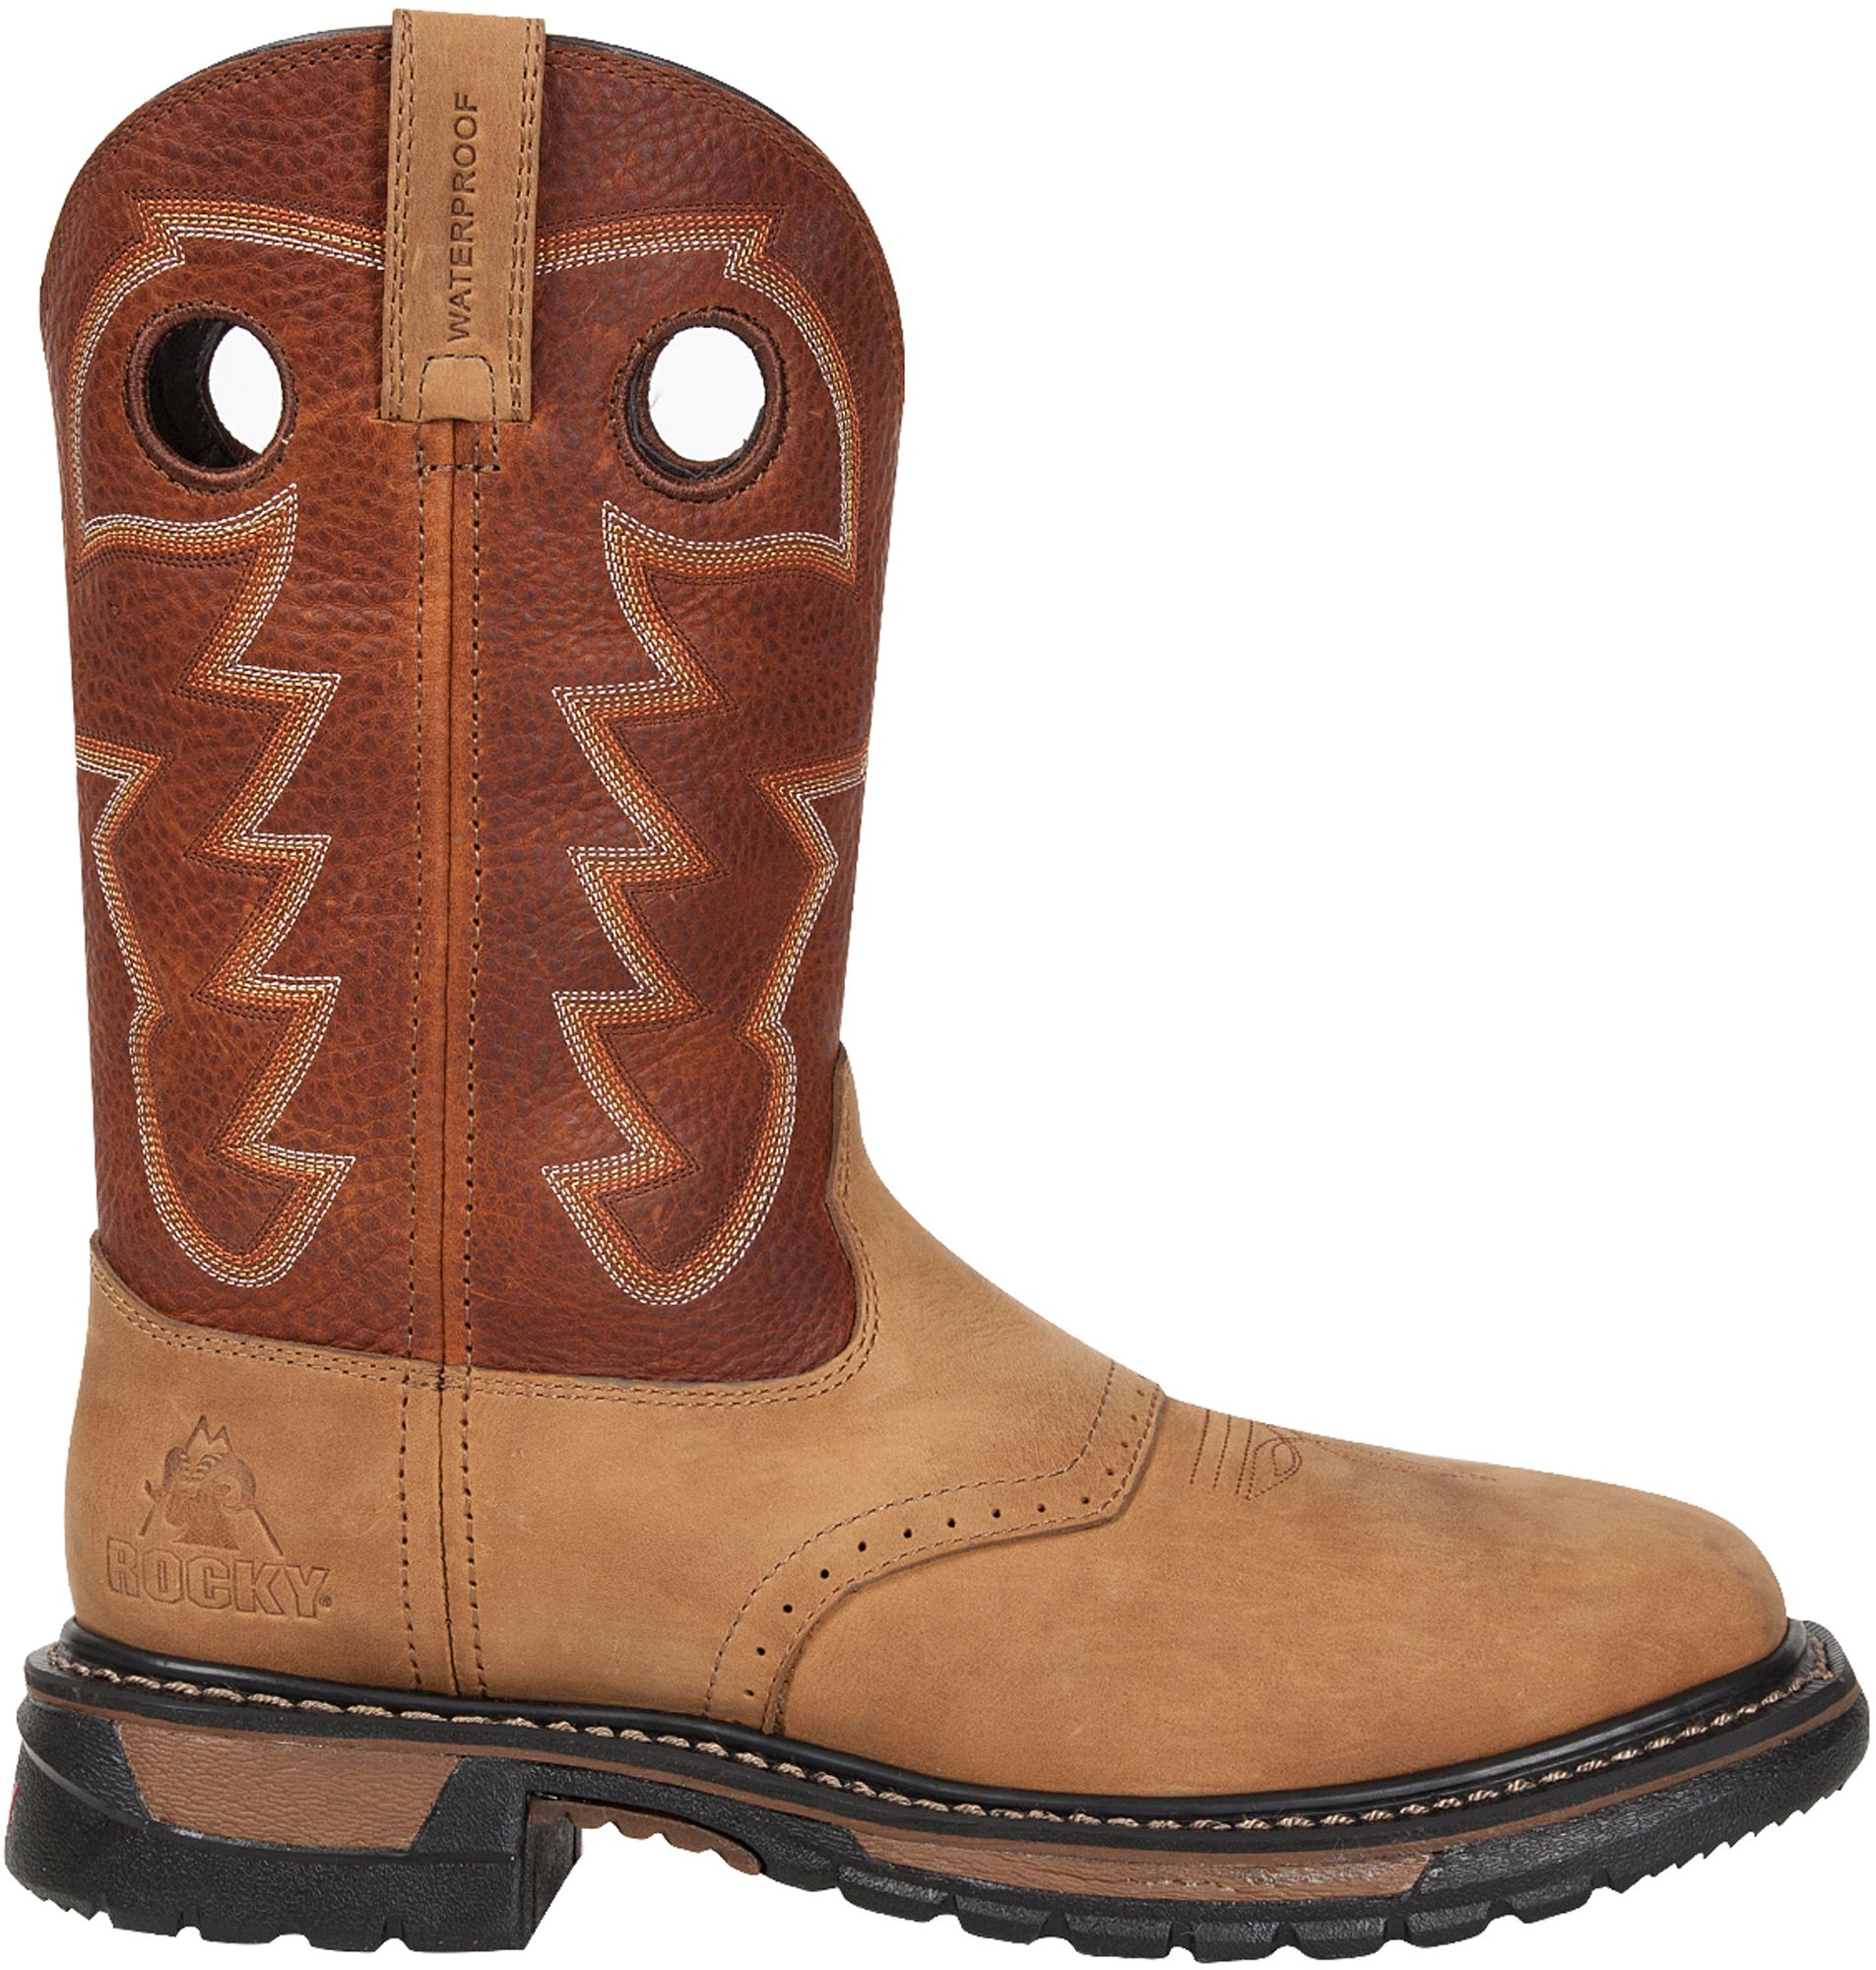 western style work boots